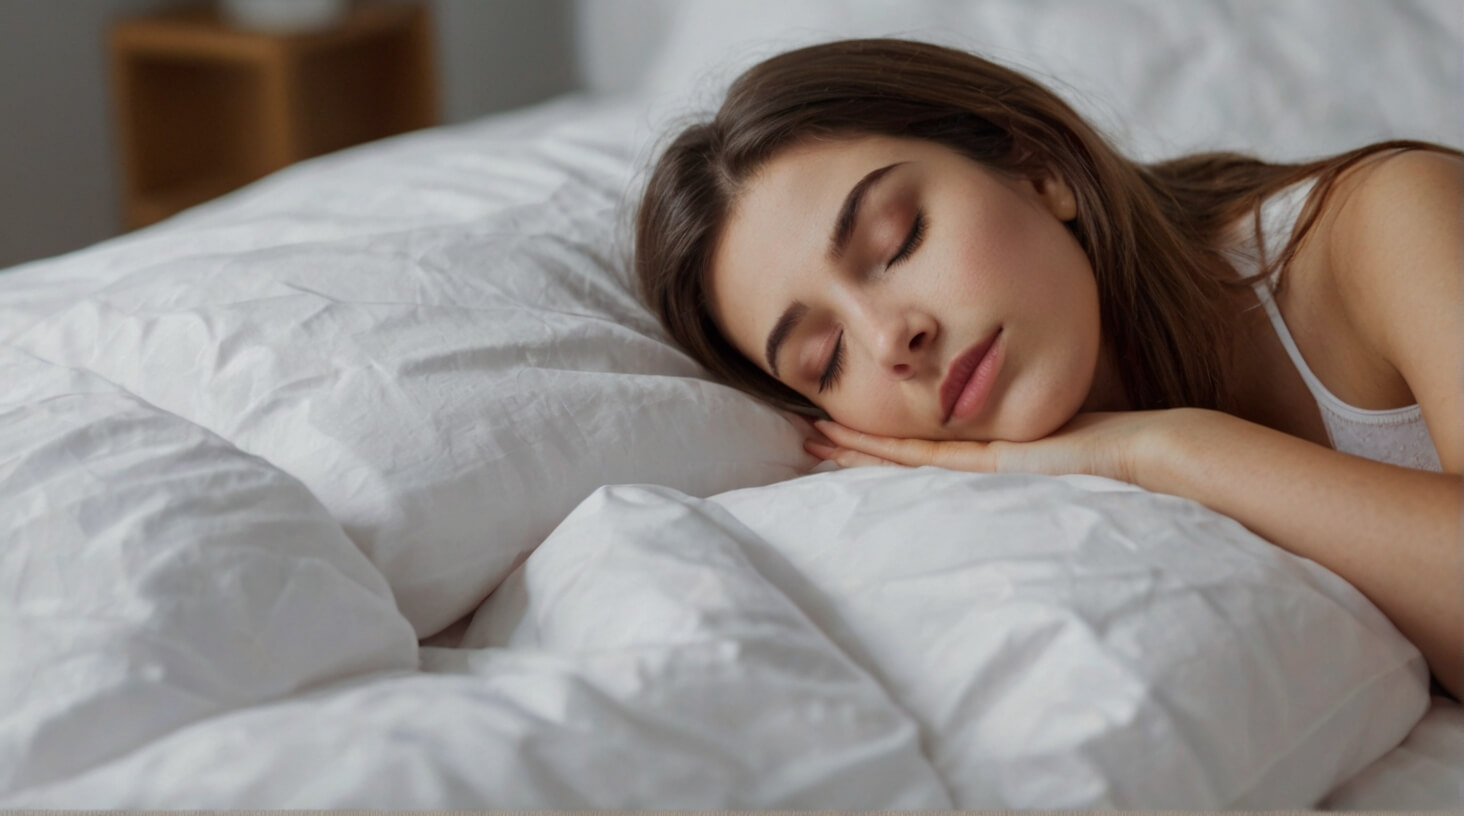 Image of a person peacefully sleeping in a comfortable bed, representing the importance of getting adequate sleep for health and well-being.